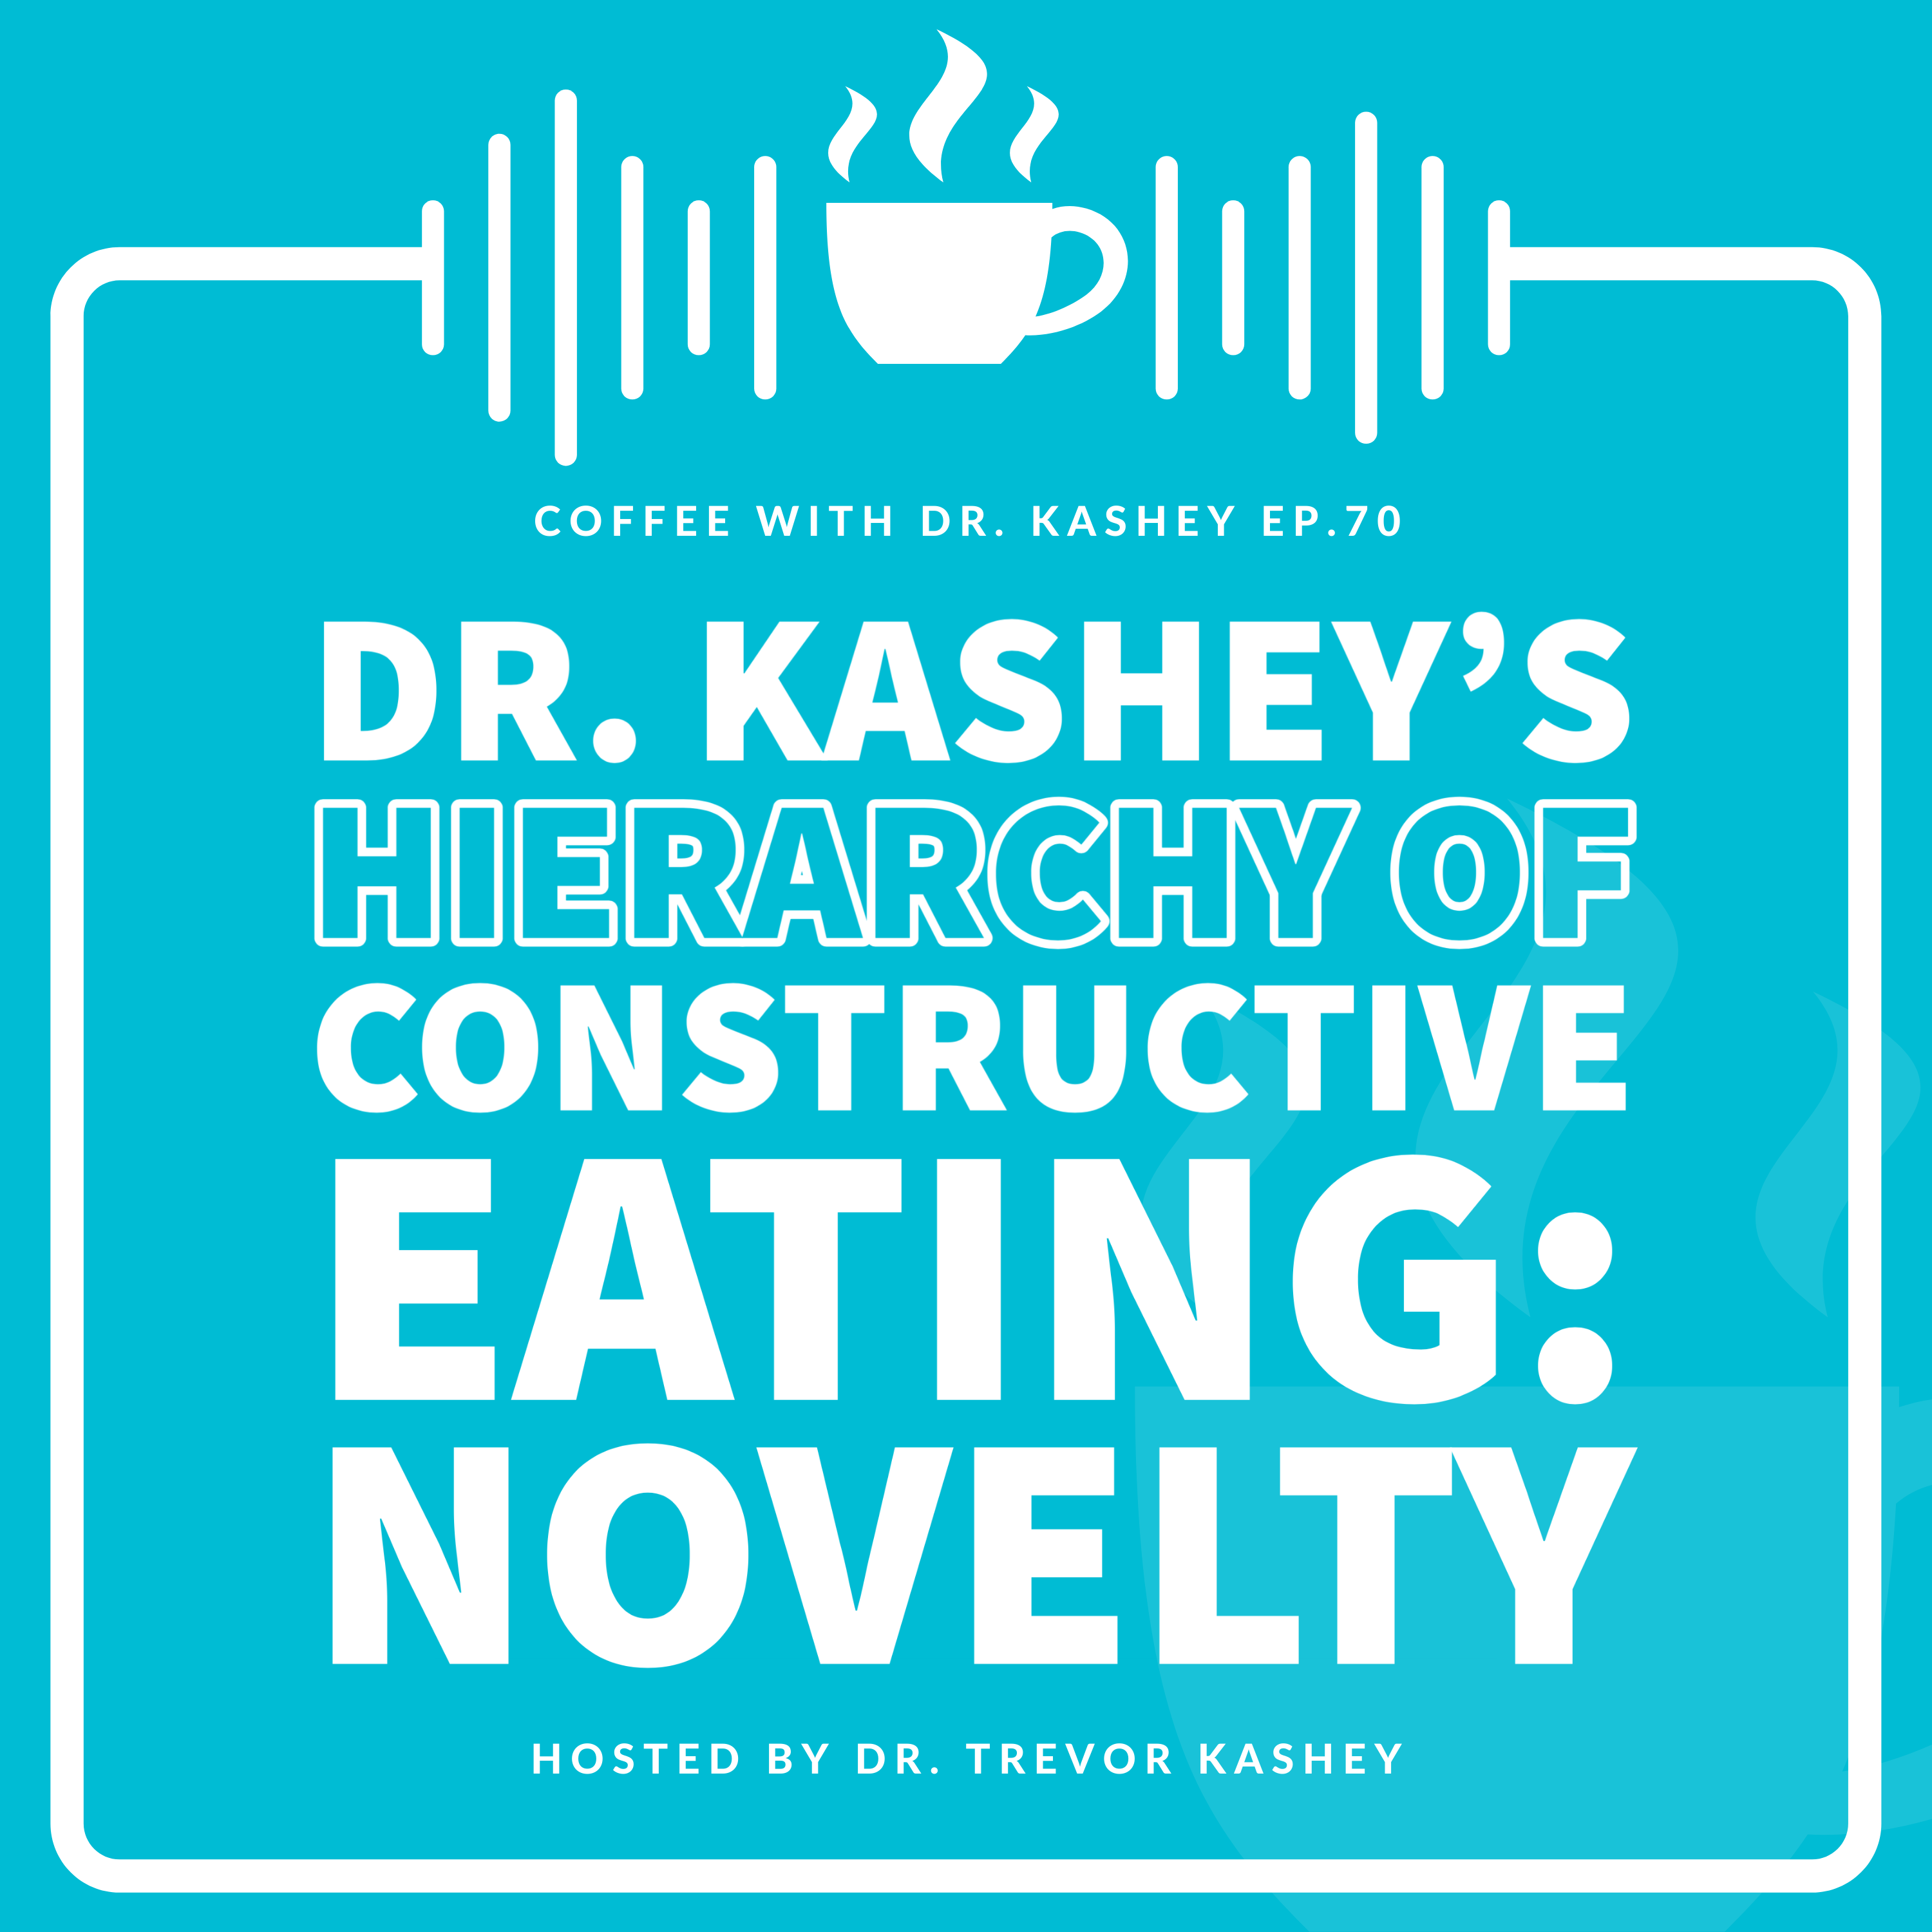 Ep# 70: Dr. Kashey's Hierarchy Of Constructive Eating: Novelty